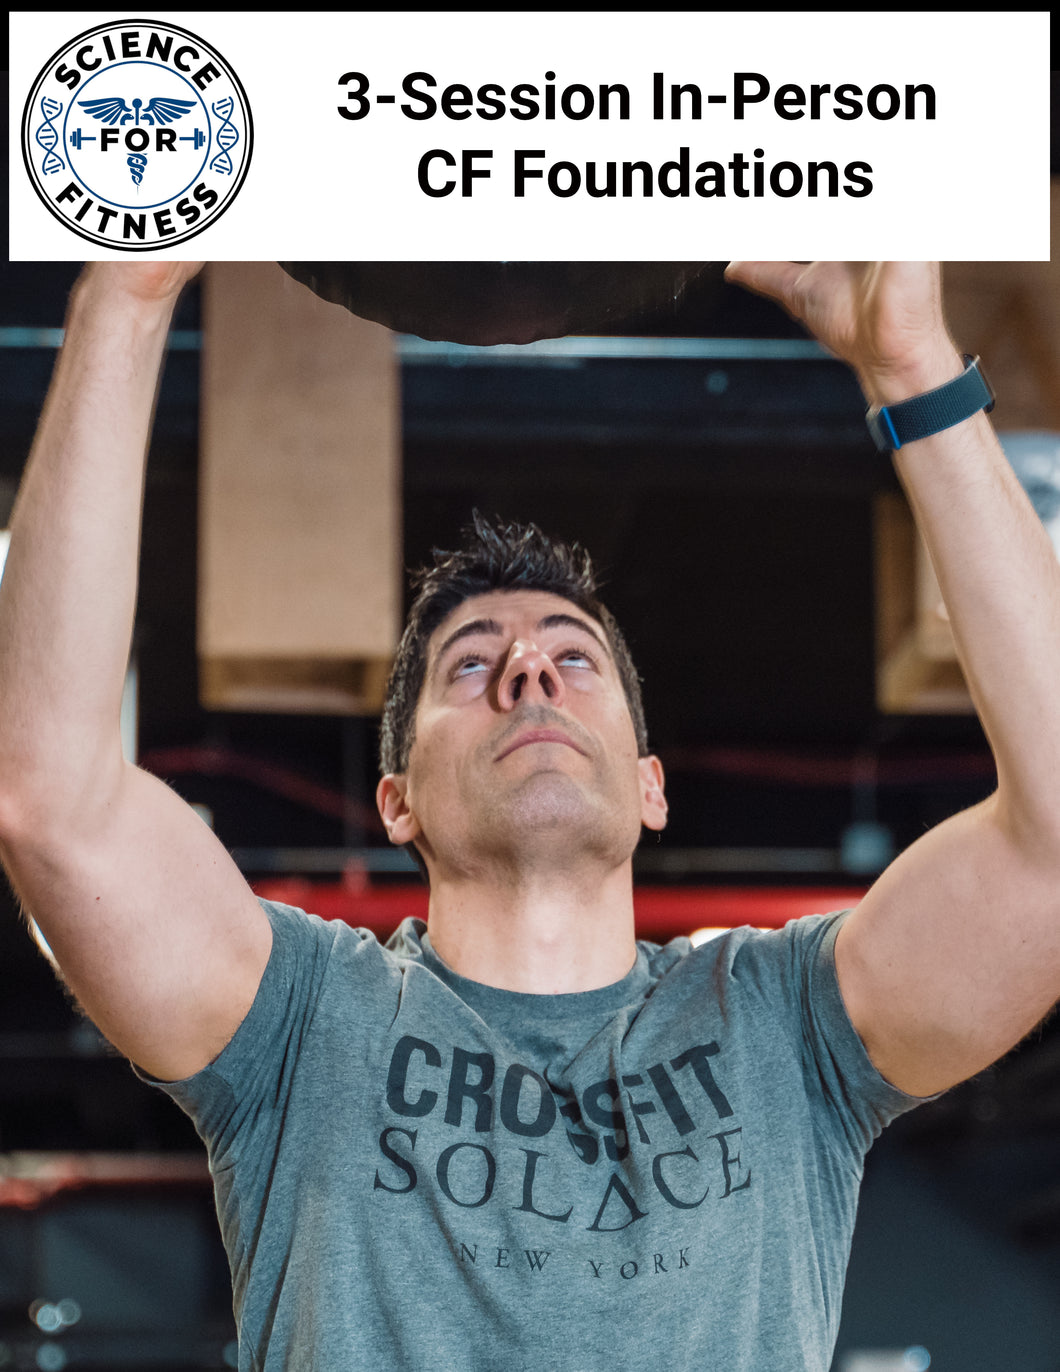 3-Session In-Person CF Foundations